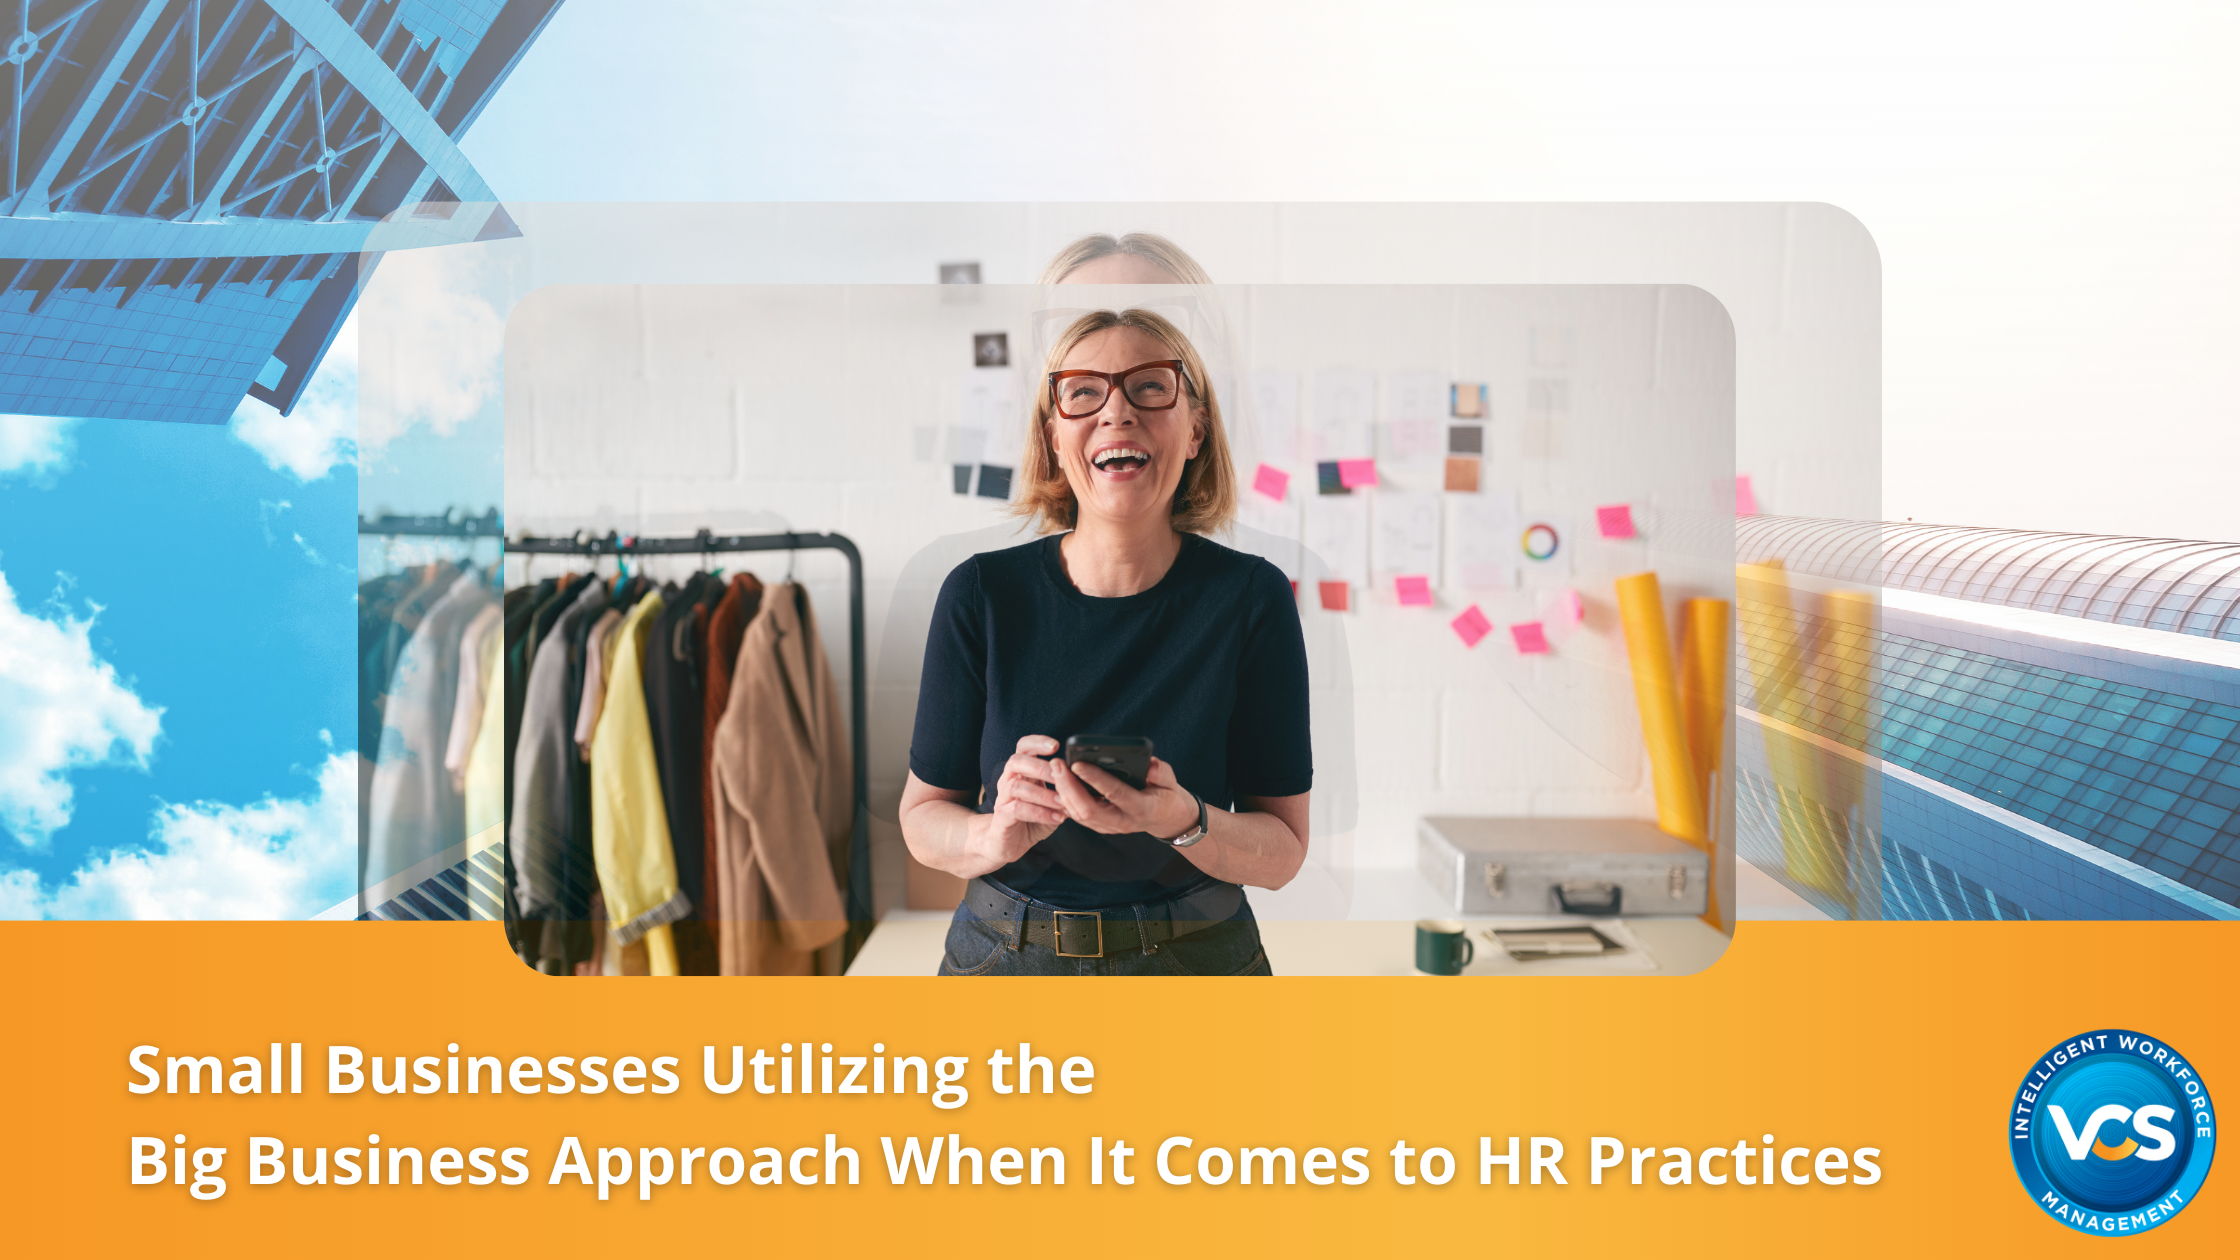 Small Businesses Utilizing the Big Business Approach When It Comes to HR Practices